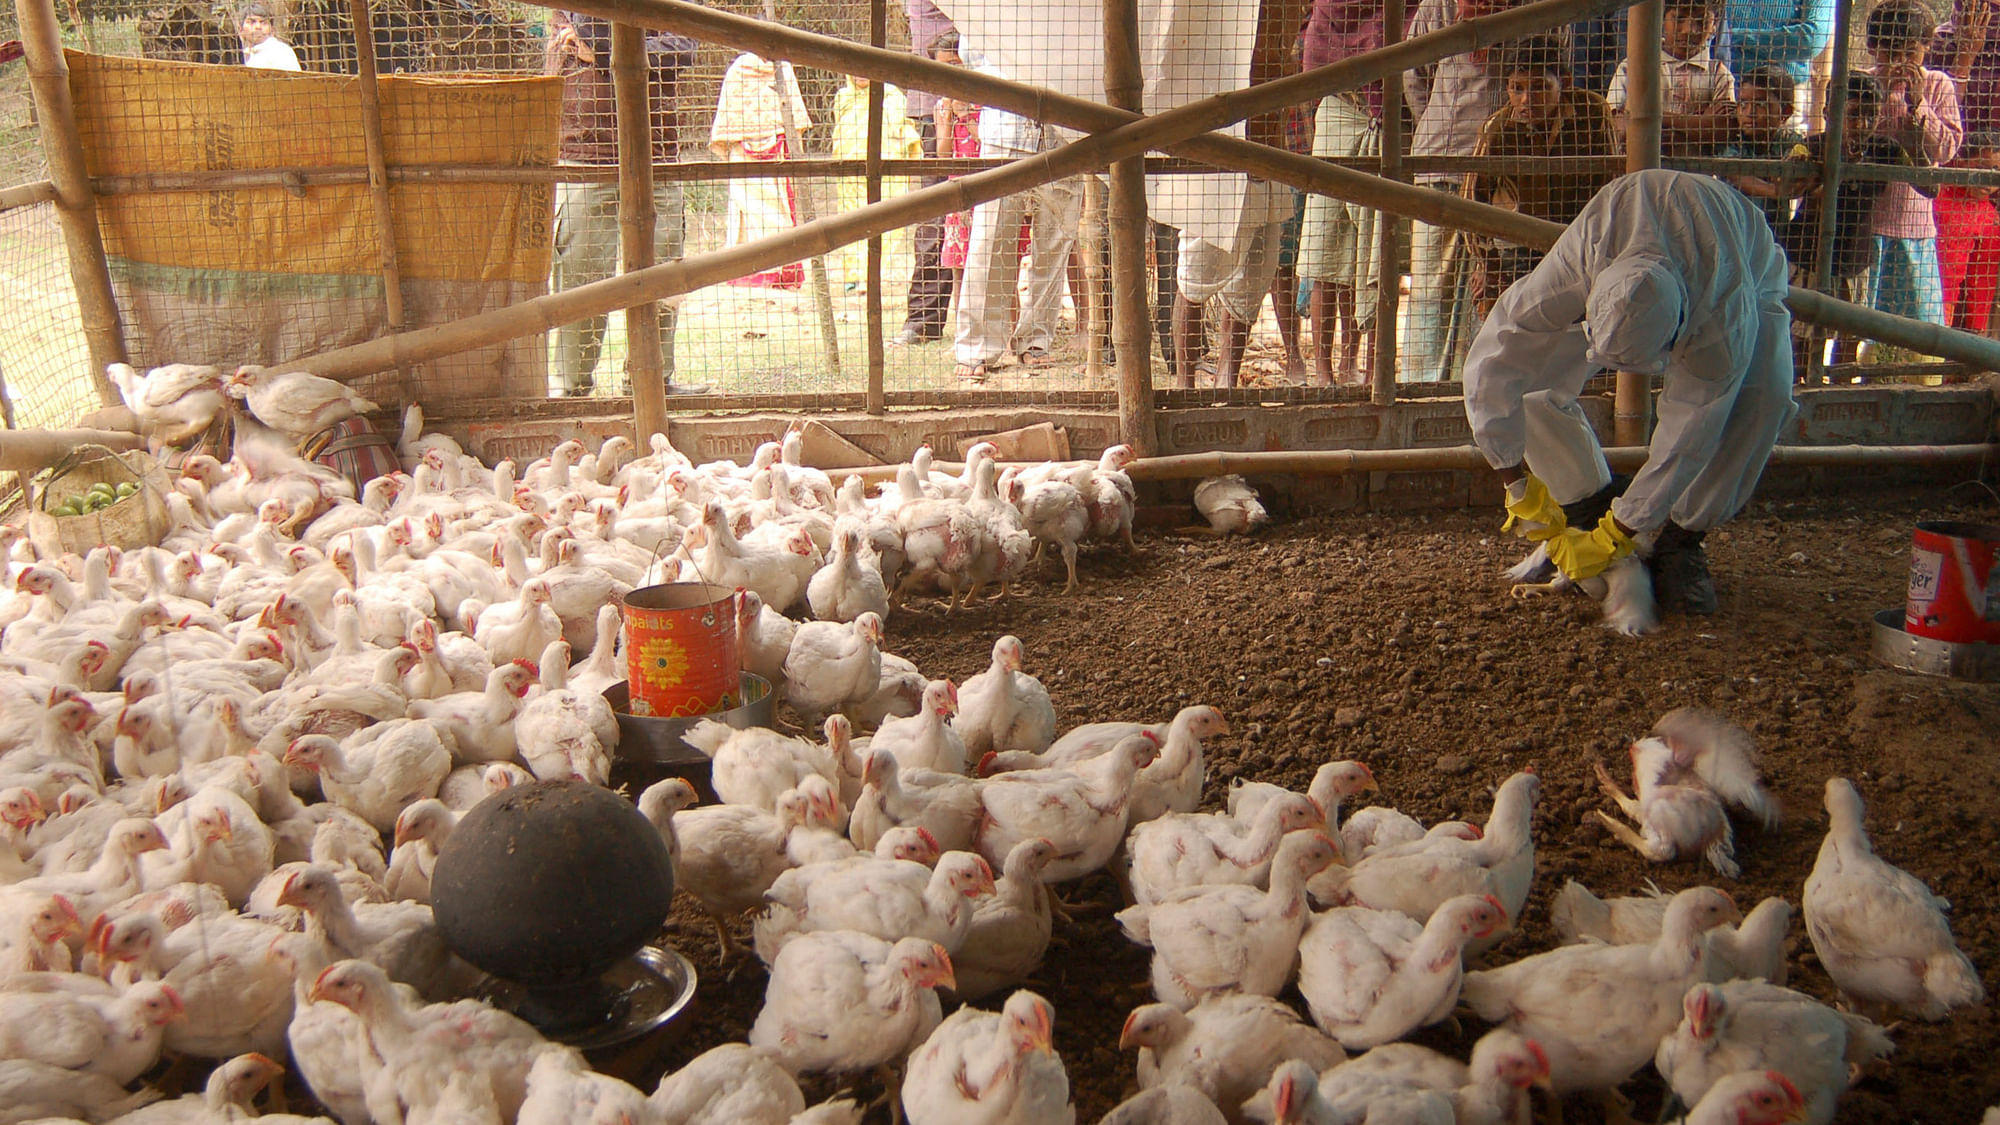 A health worker is seen giving ‘medicine’ to the chickens at a poultry farm. Image used for representation.&nbsp;